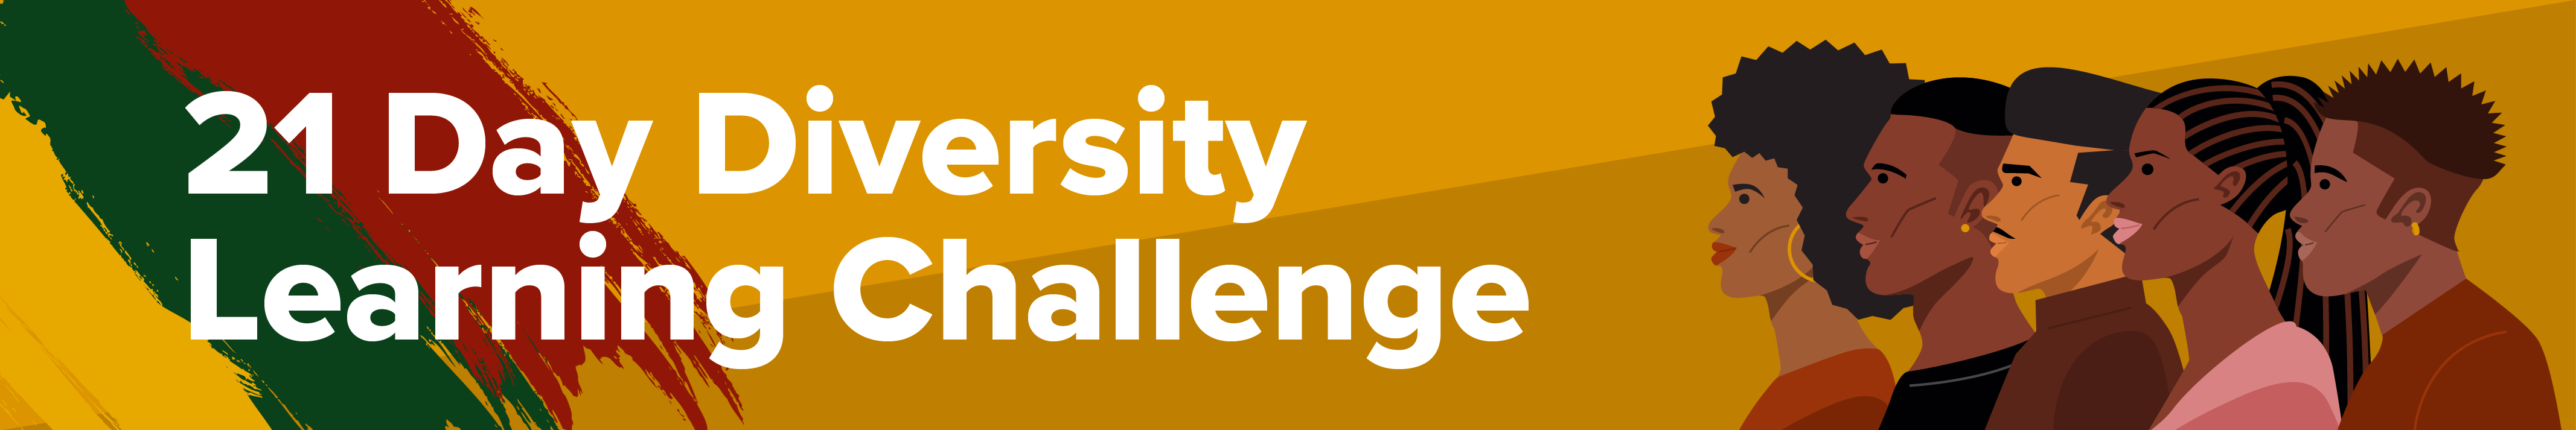 21 Day Diversity Learning Challenge